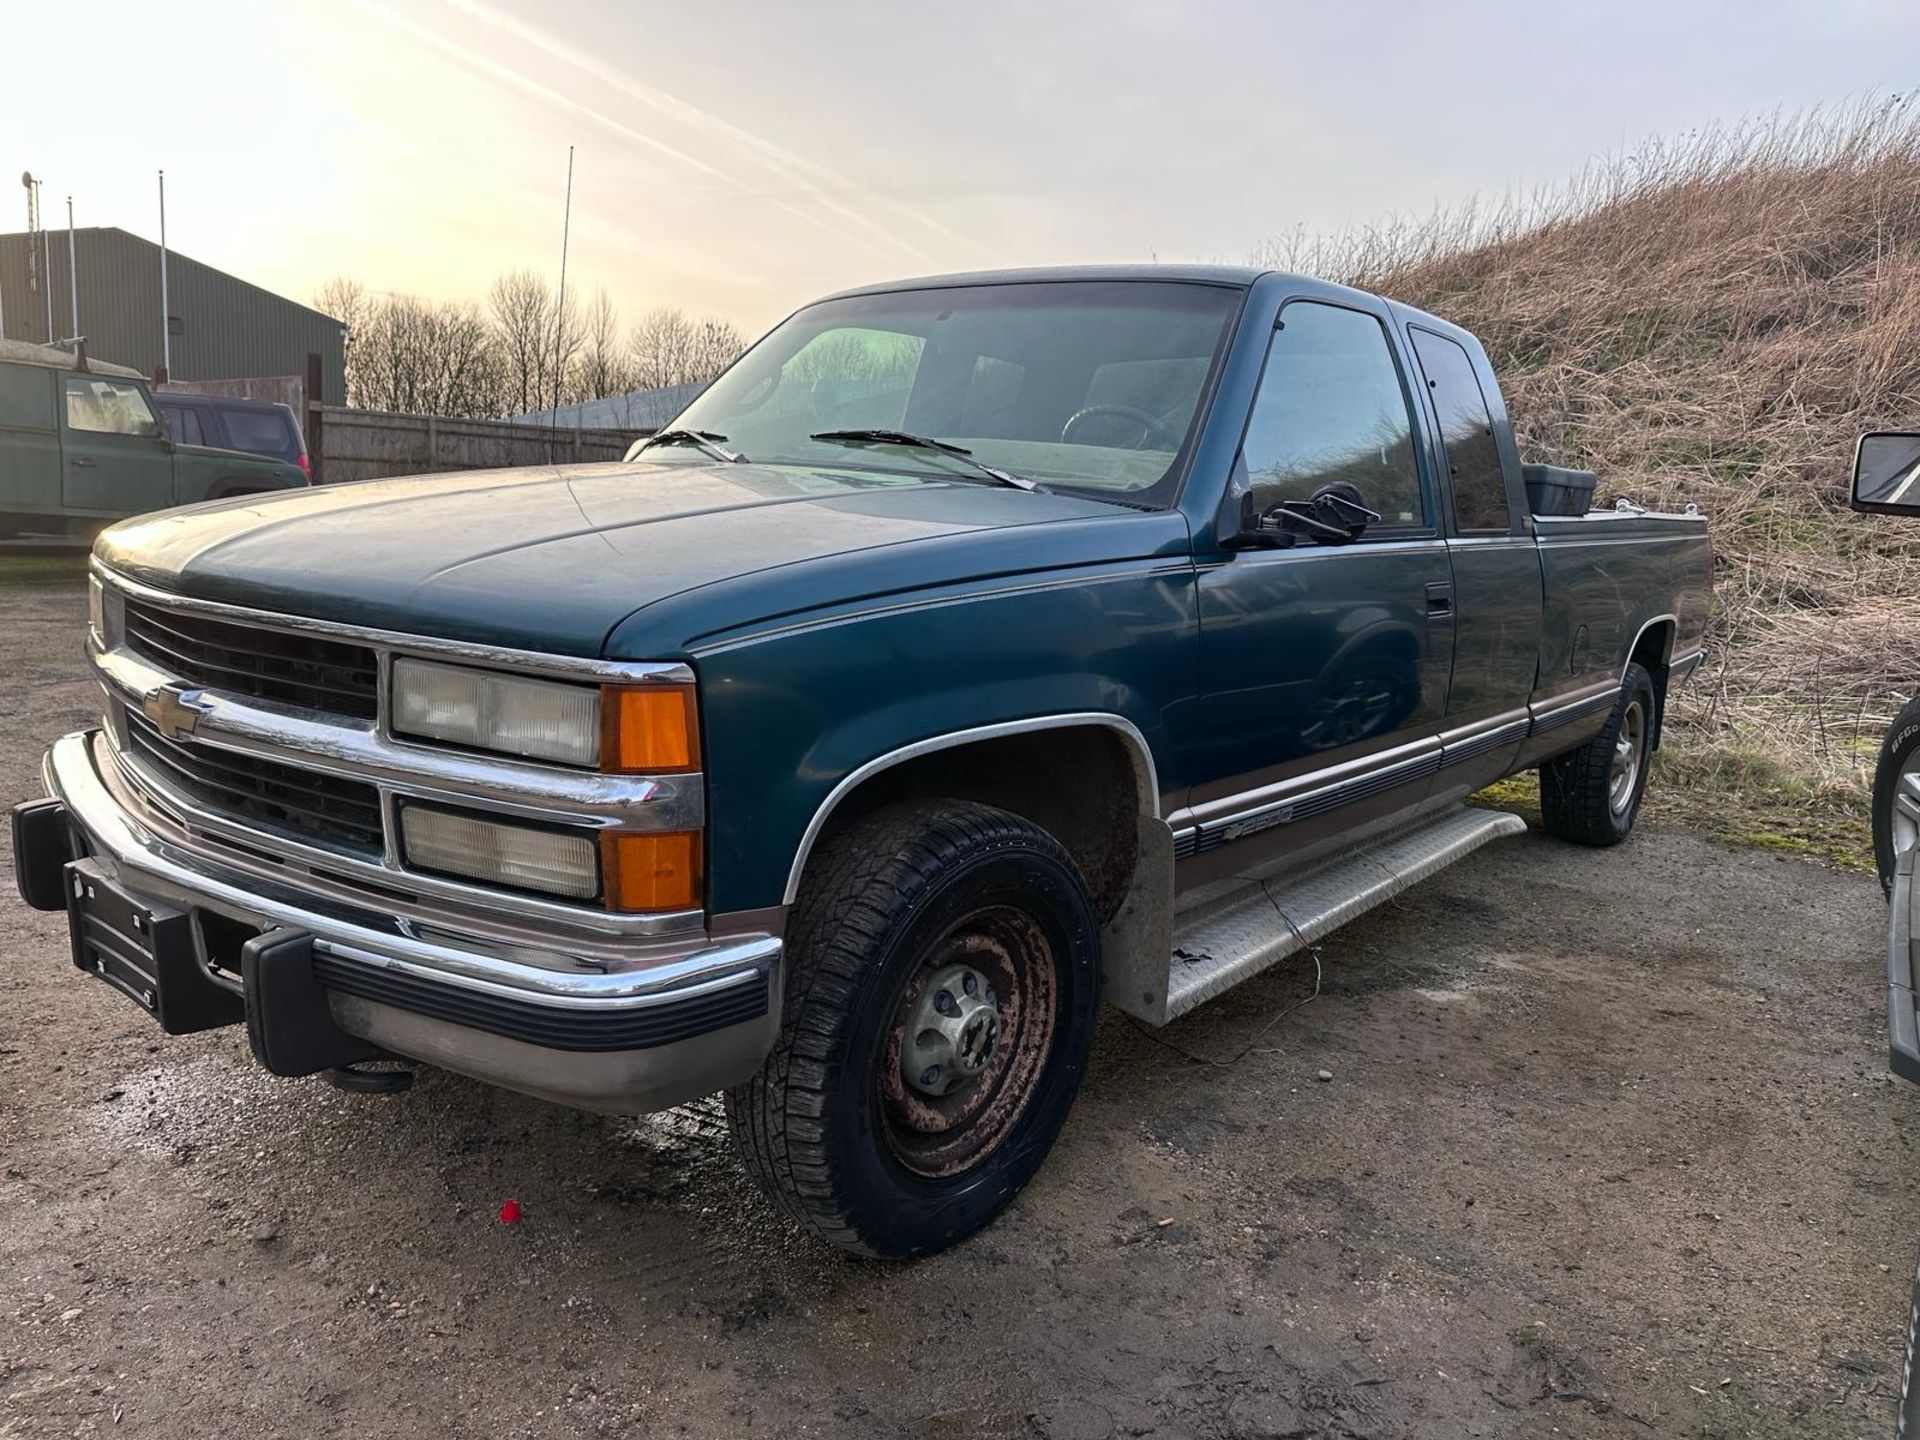 1995 CHEVROLET C2500 - 6.5 V8 TURBO DIESEL - AUTOMATIC GEARBOX - 129,646 MILES - Image 3 of 11